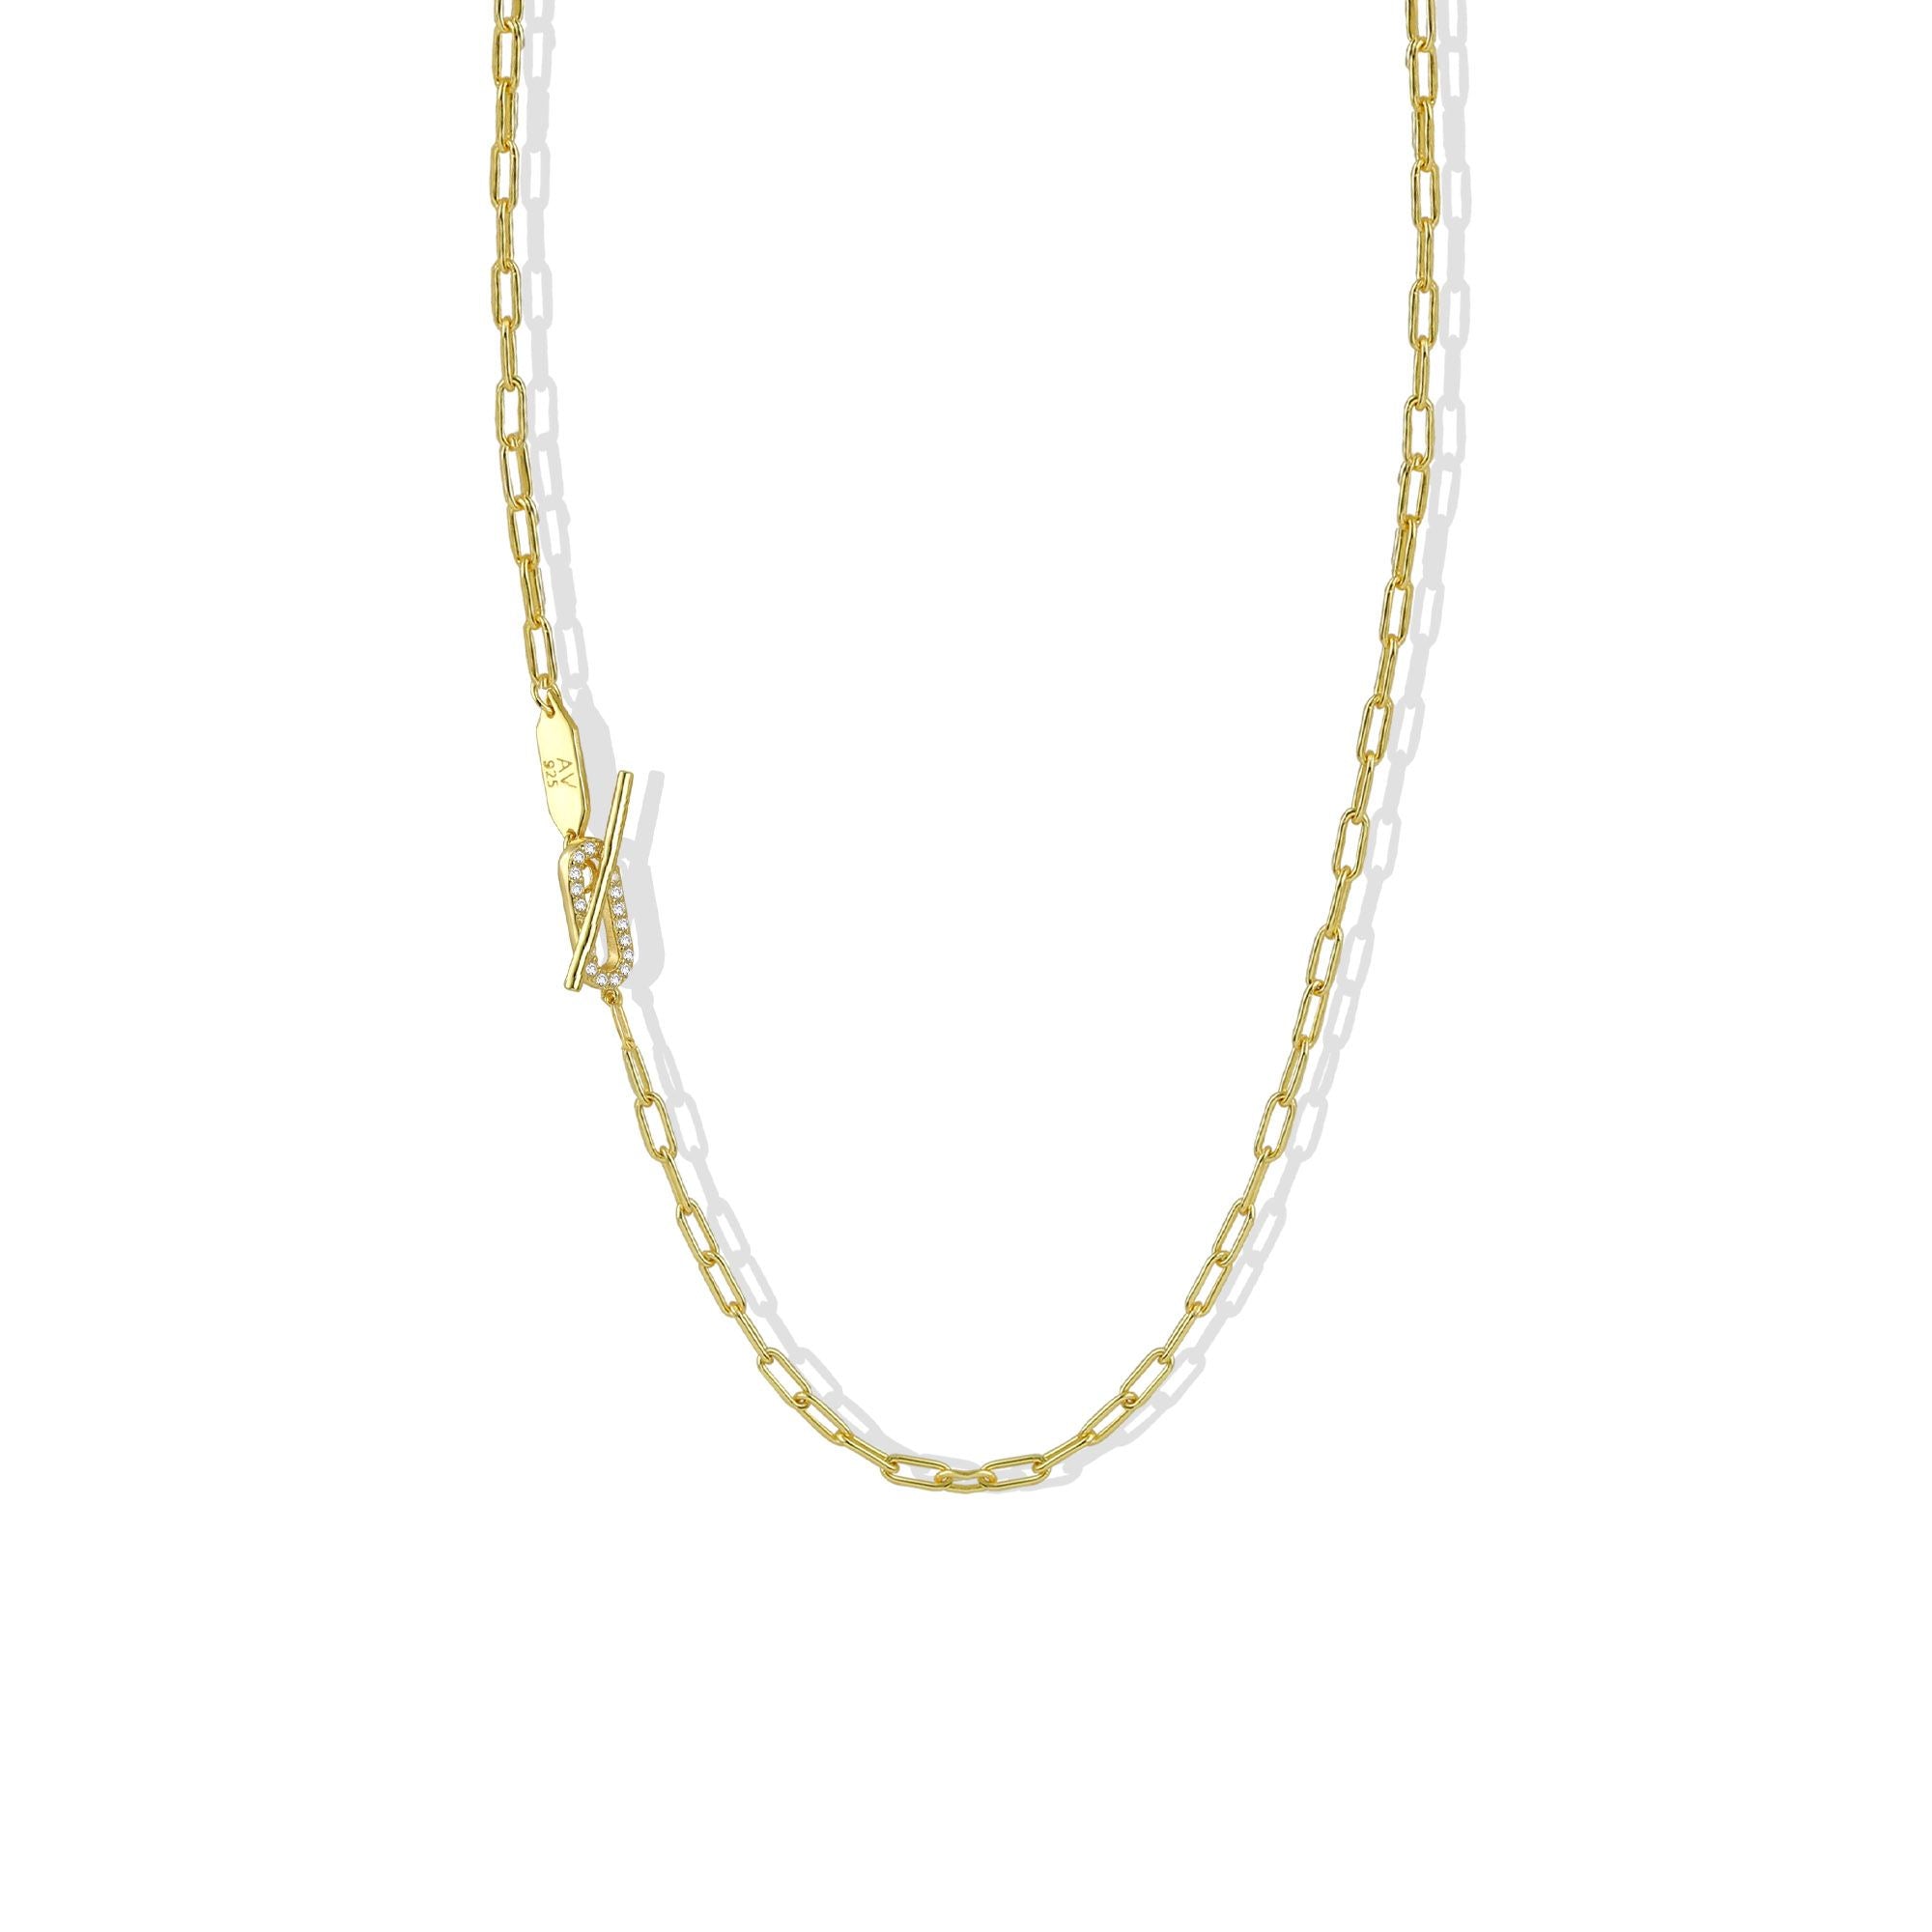 THE PAVE TOGGLE LINK NECKLACE